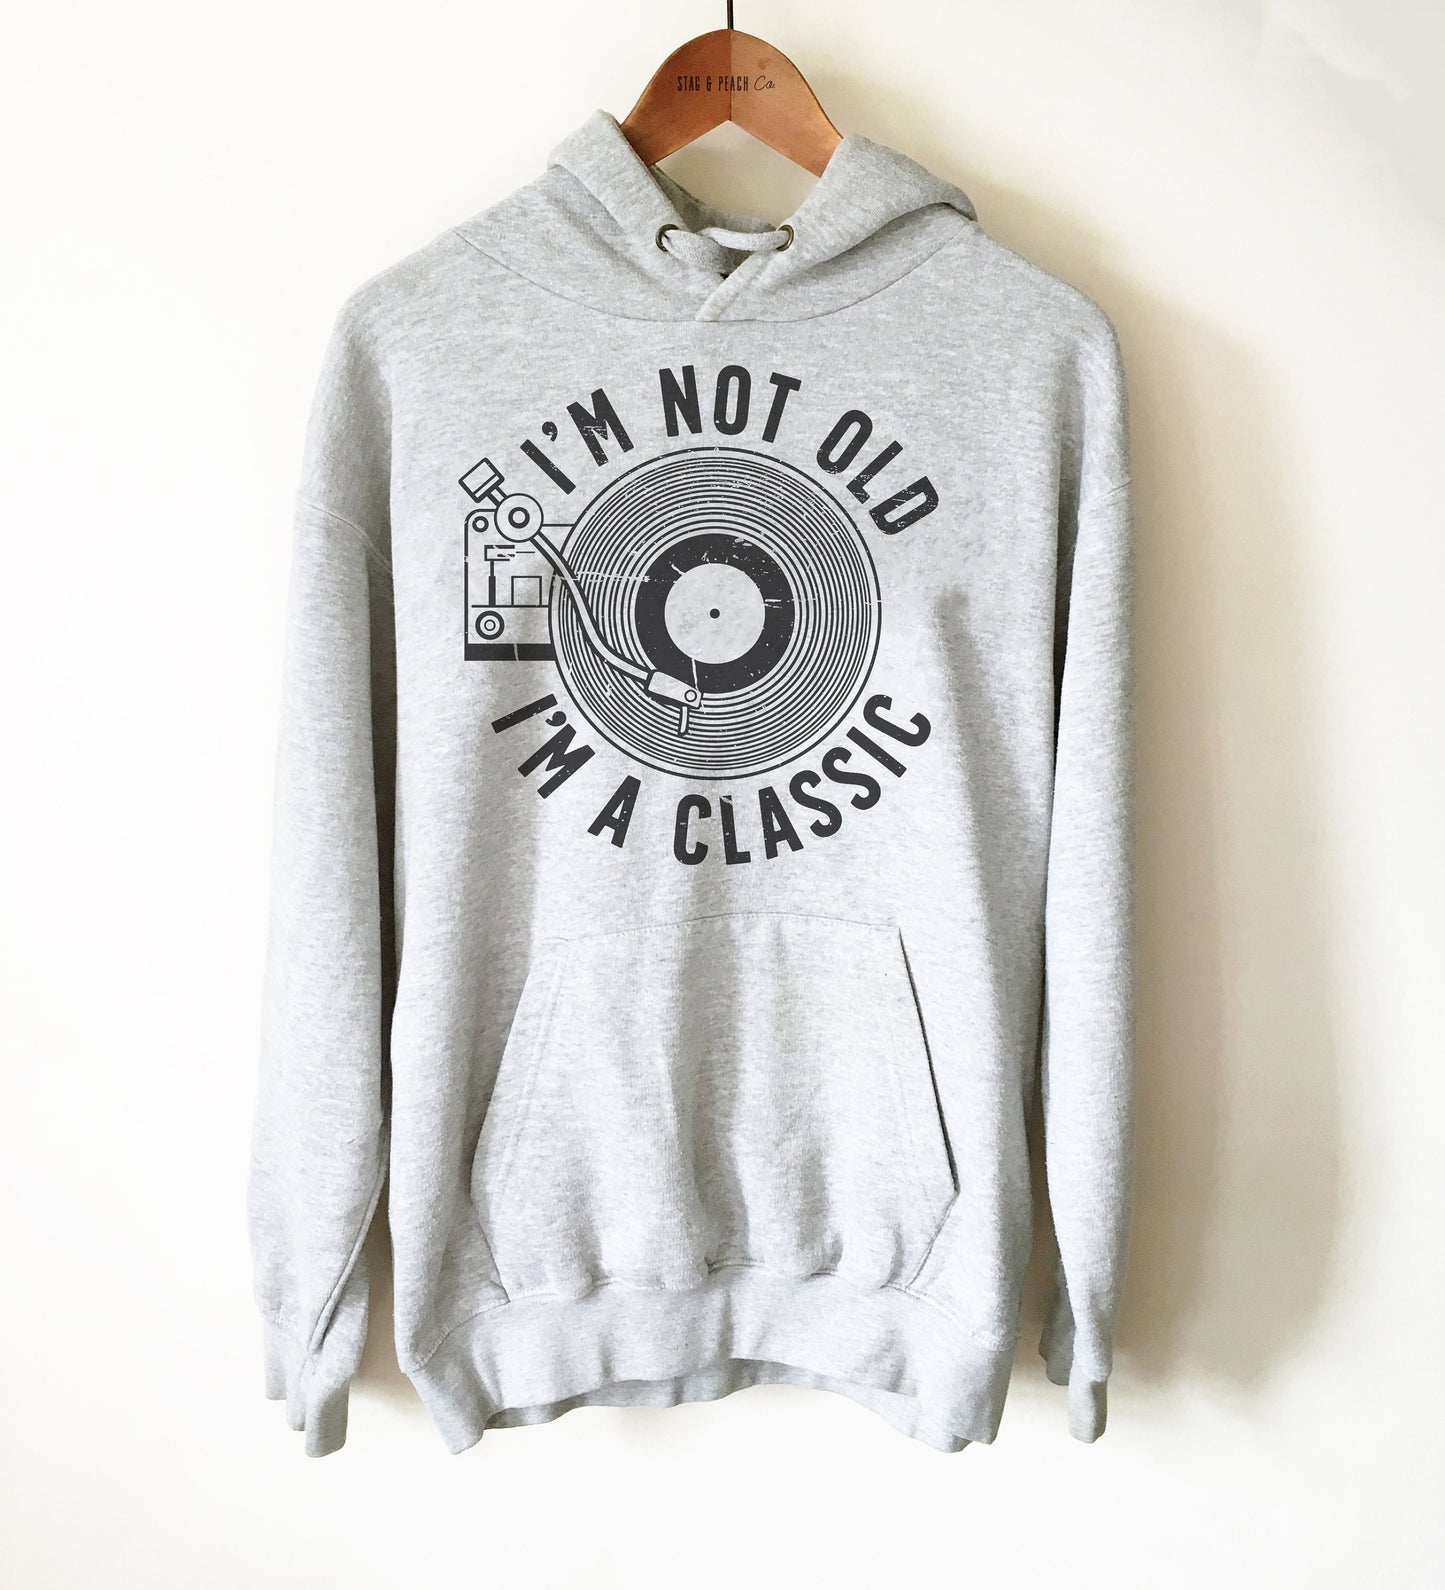 I'm Not Old I'm A Classic Unisex Hoodie - Record Collector Shirt, Music Lover Gift, Retirement Shirt, Mom or Dad Shirt, Grandparent Gift